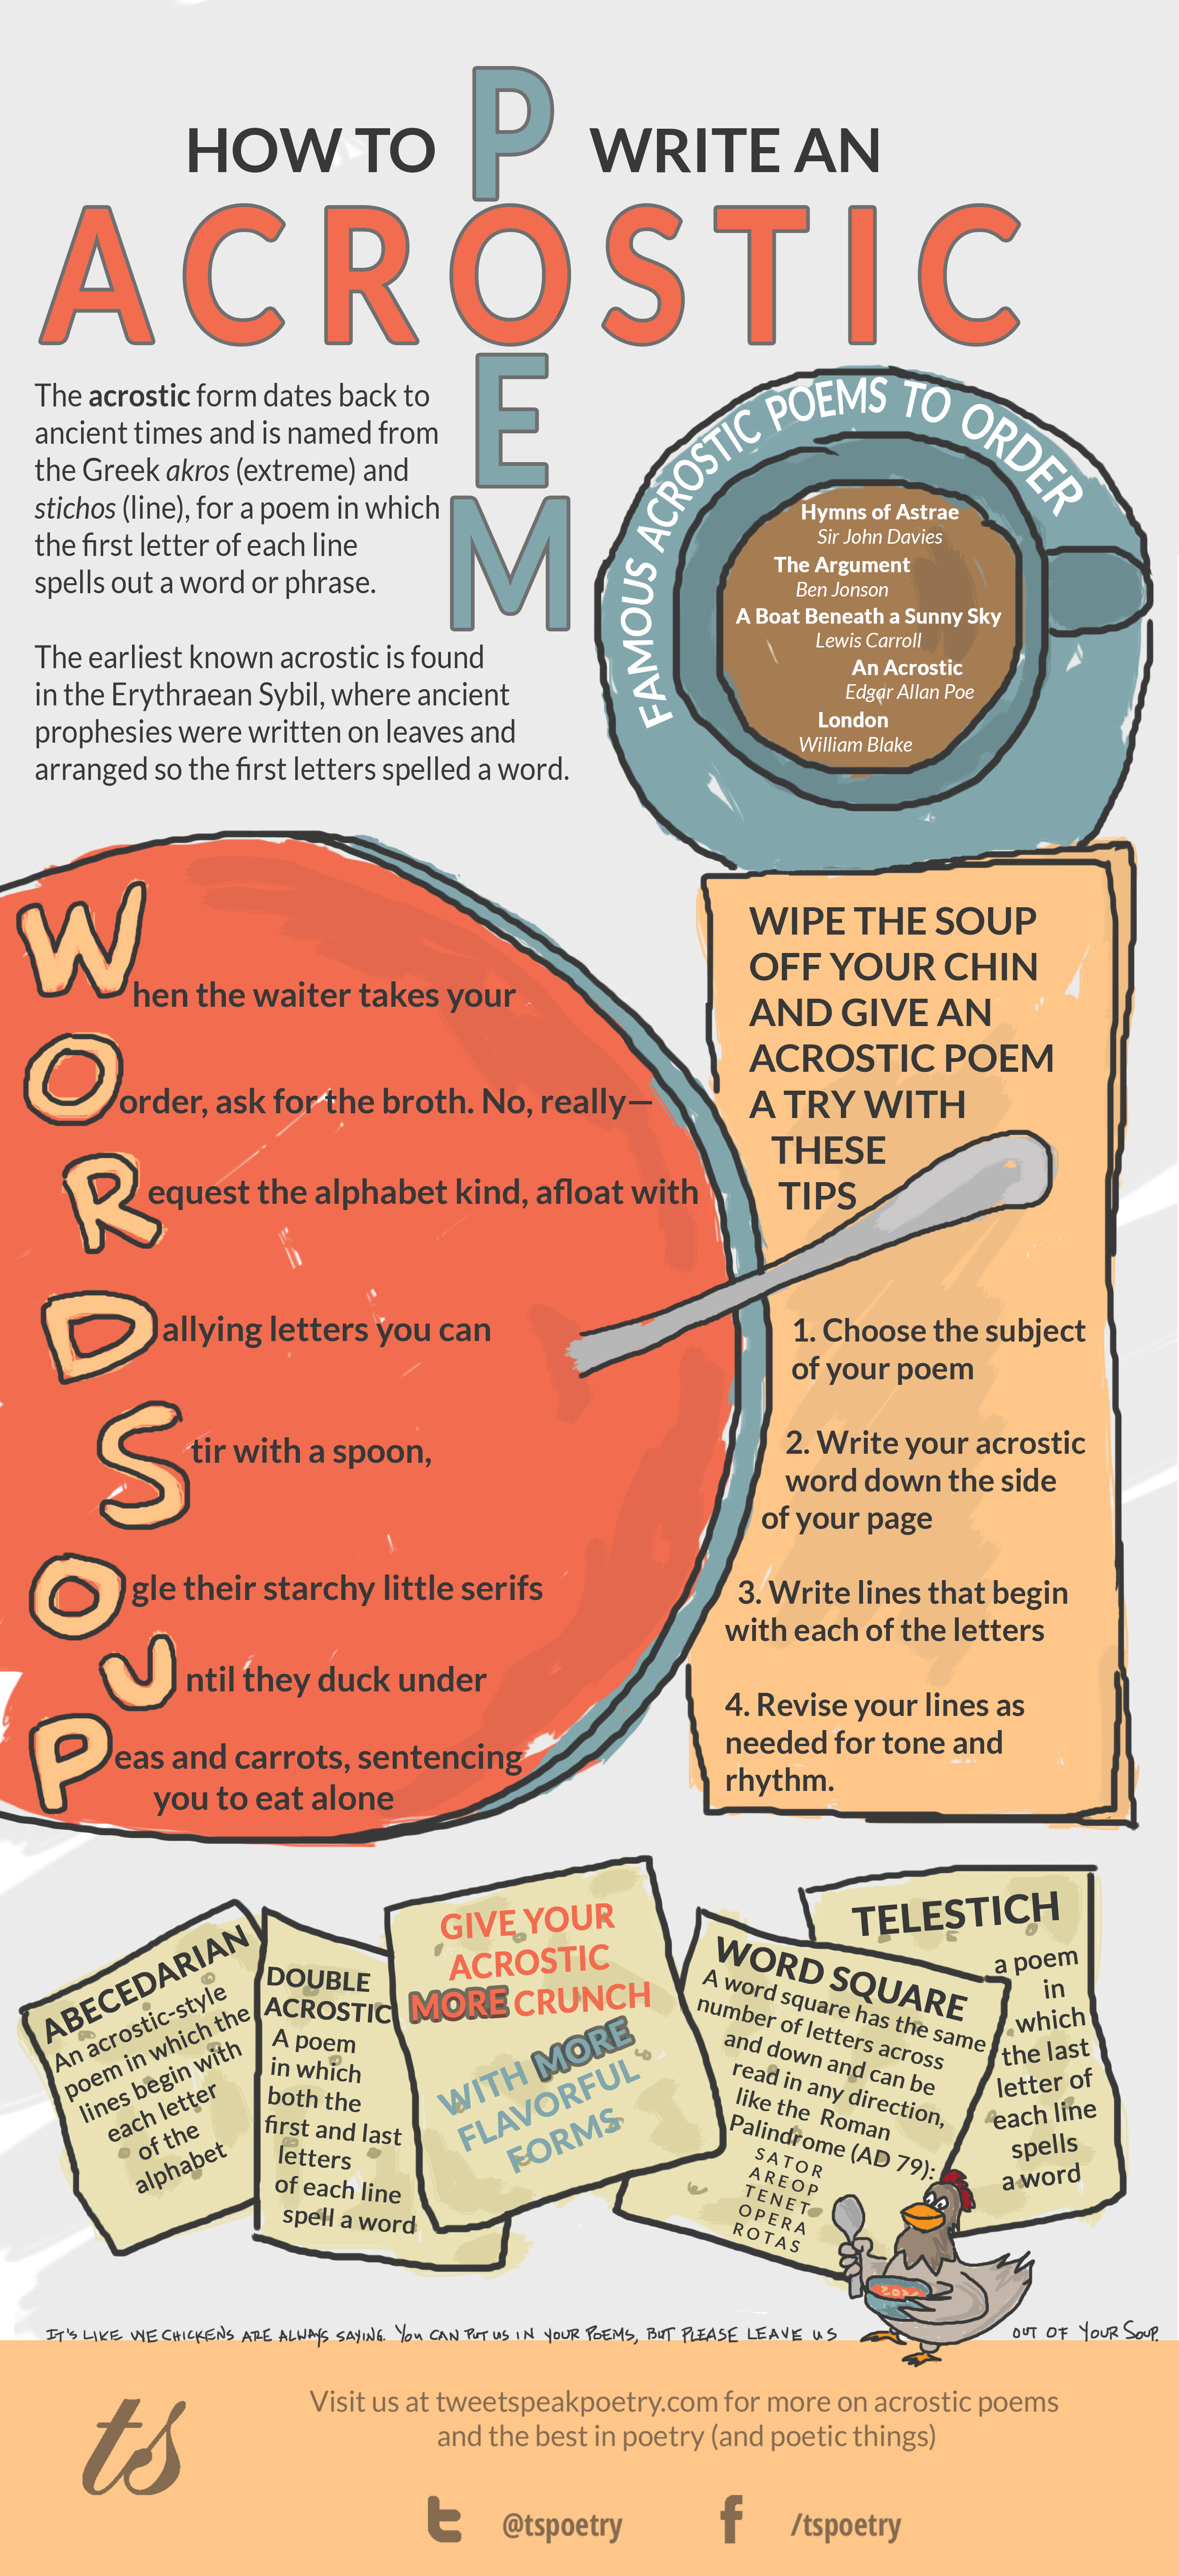 How to Write an Acrostic Poem Infographic